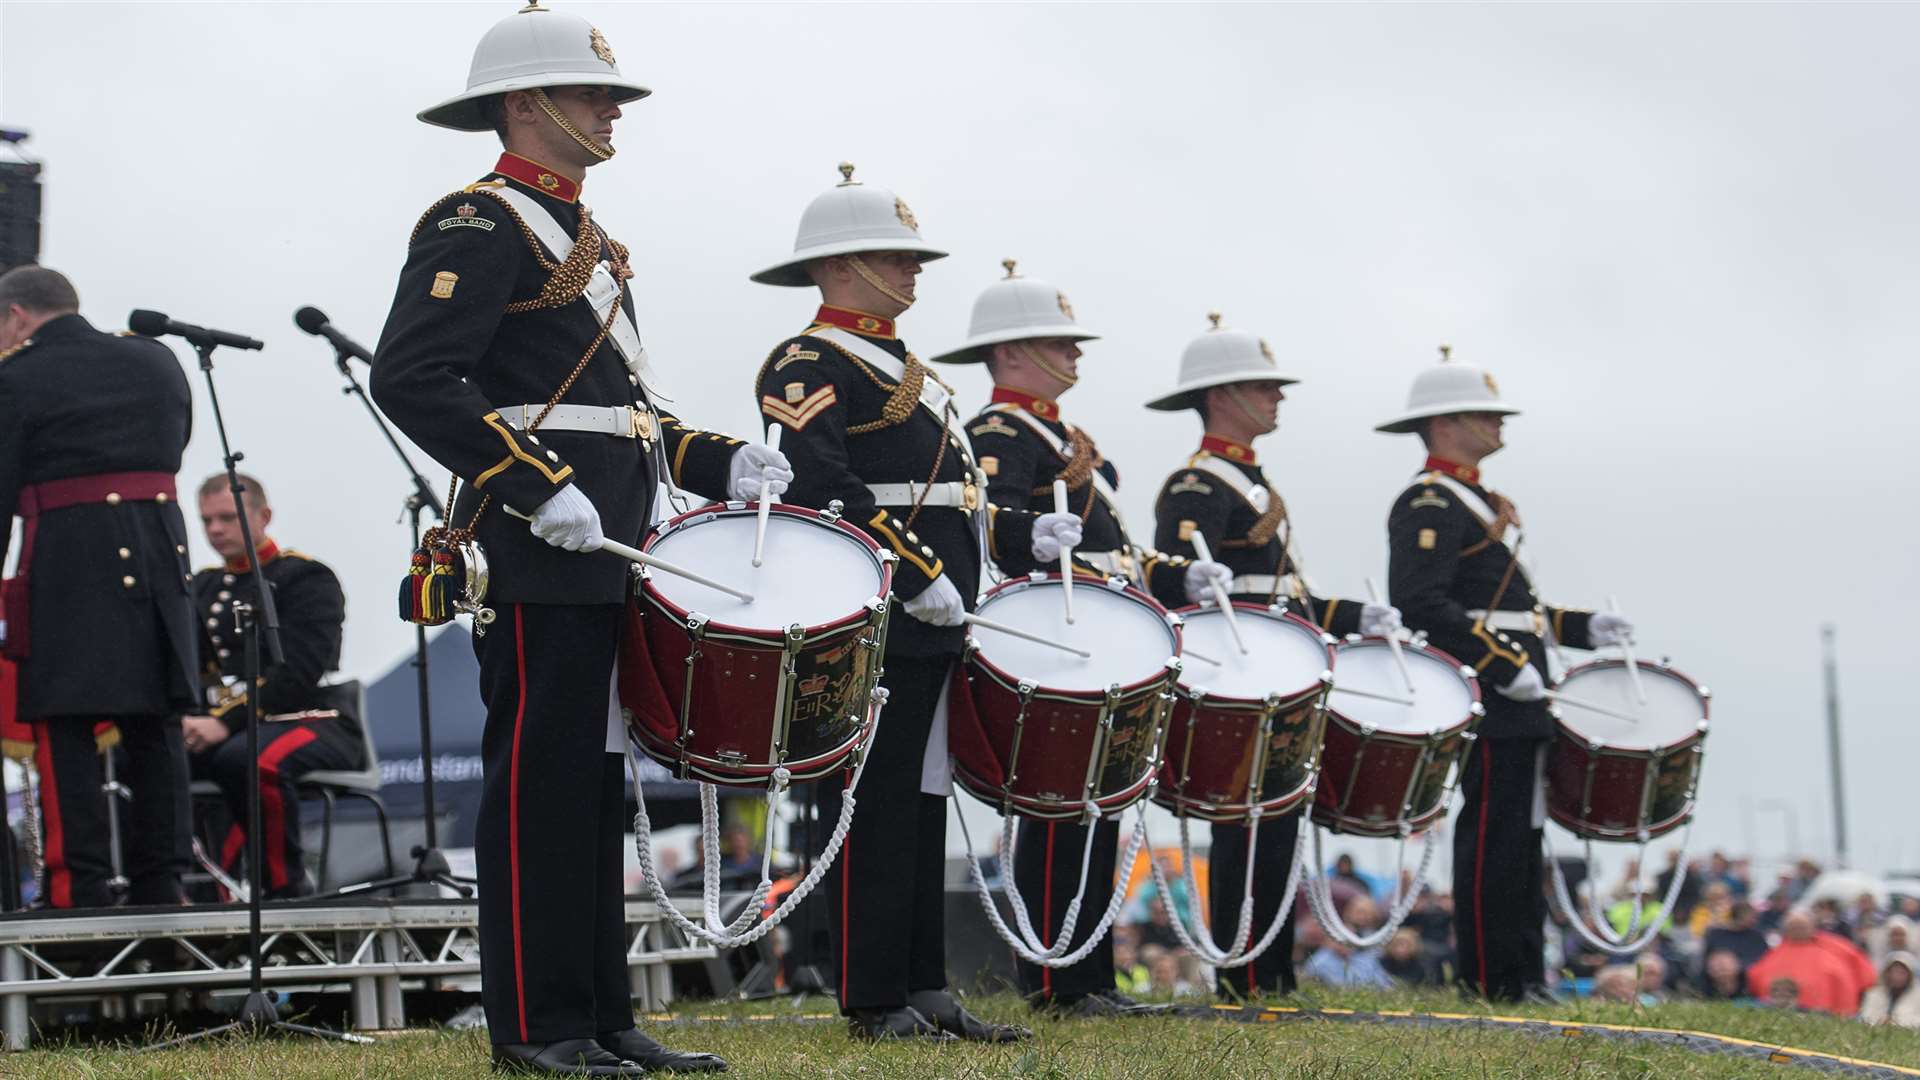 The Marines on the Green concert at Walmer last year with the Royal Marines (Porsmouth Band)